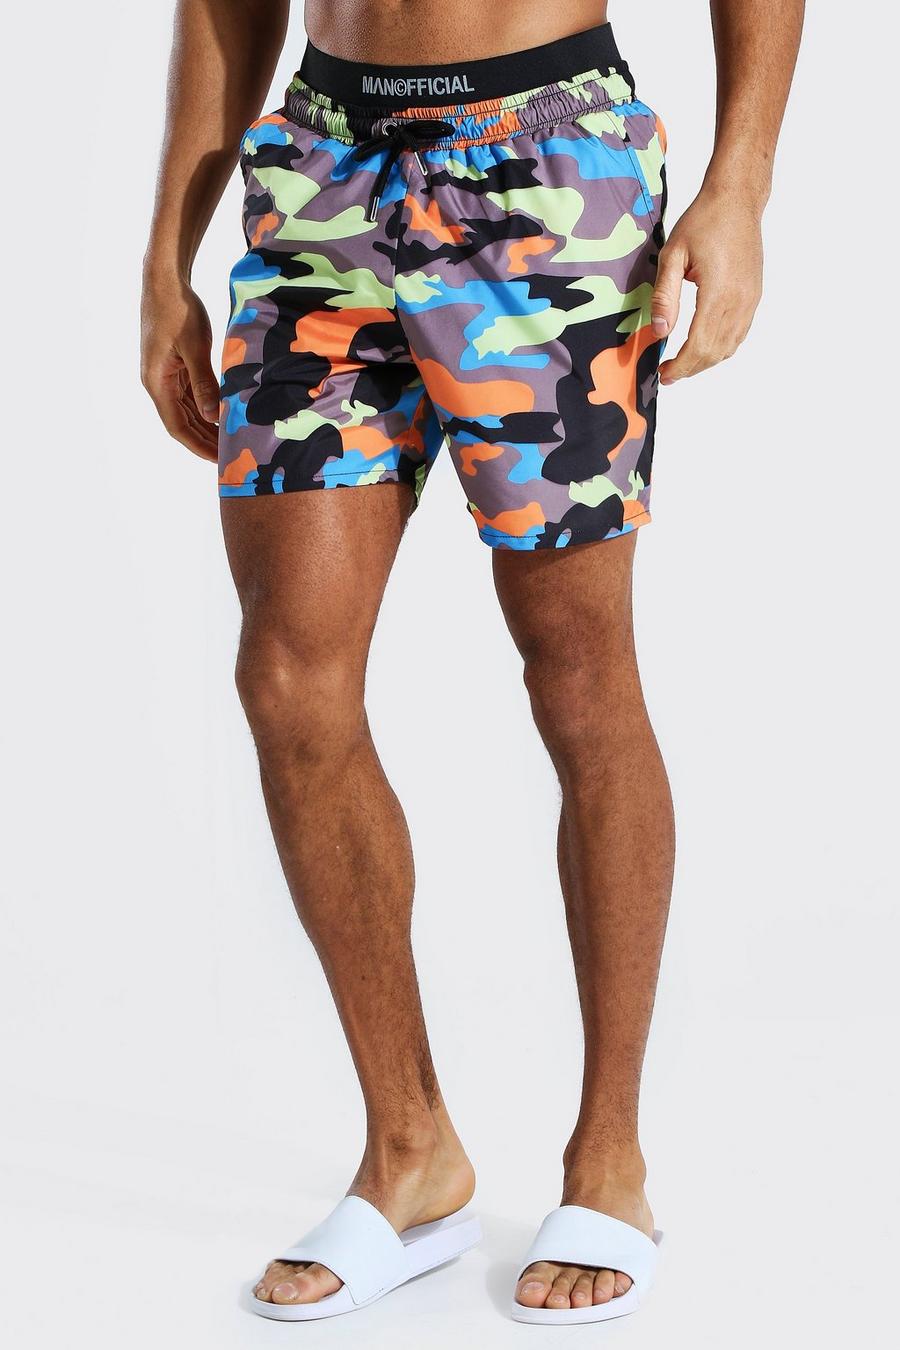 Multi Man Official Waistband Camo Mid Length Swim image number 1